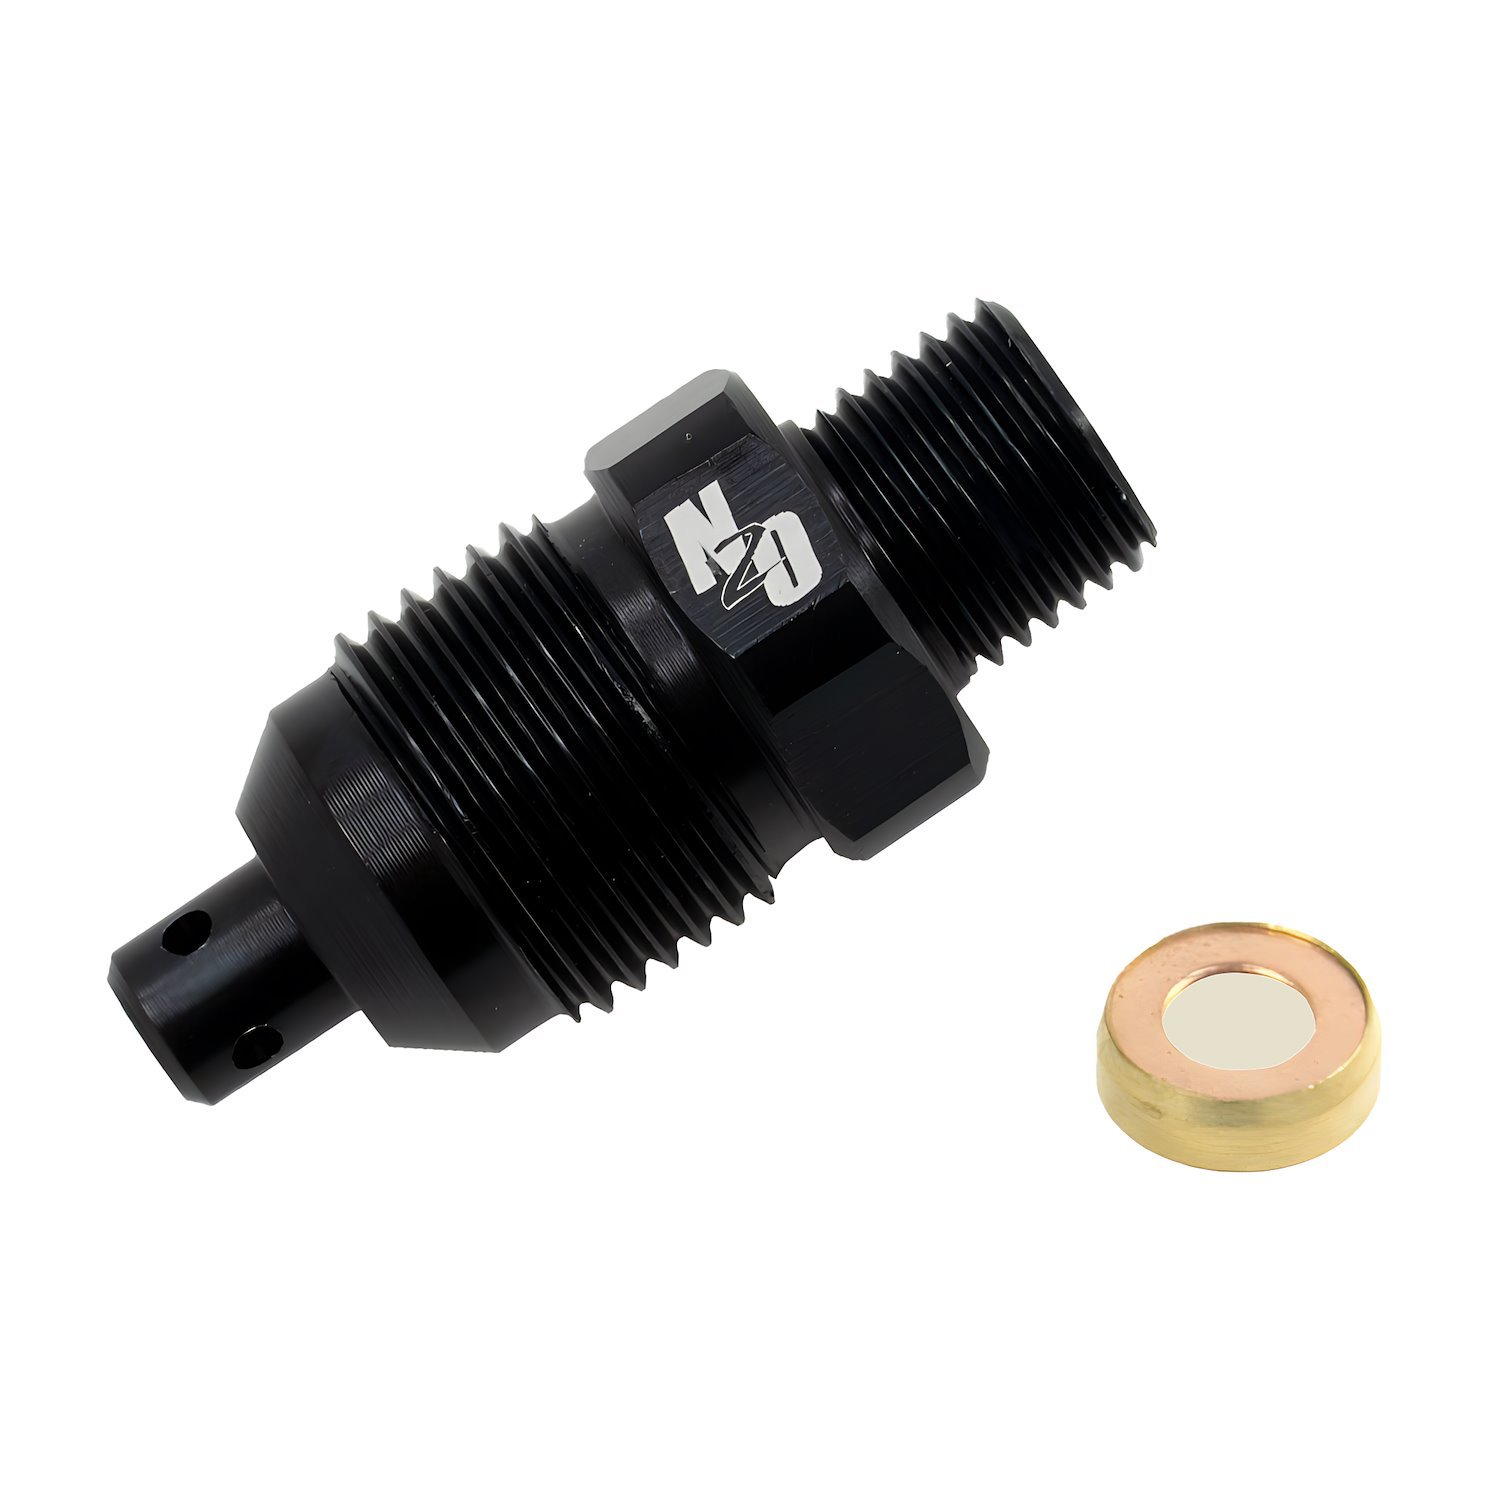 00-35001 Nitrous Outlet/X-Series Pressure Relief Valve, 3000 psi Rupture Disk